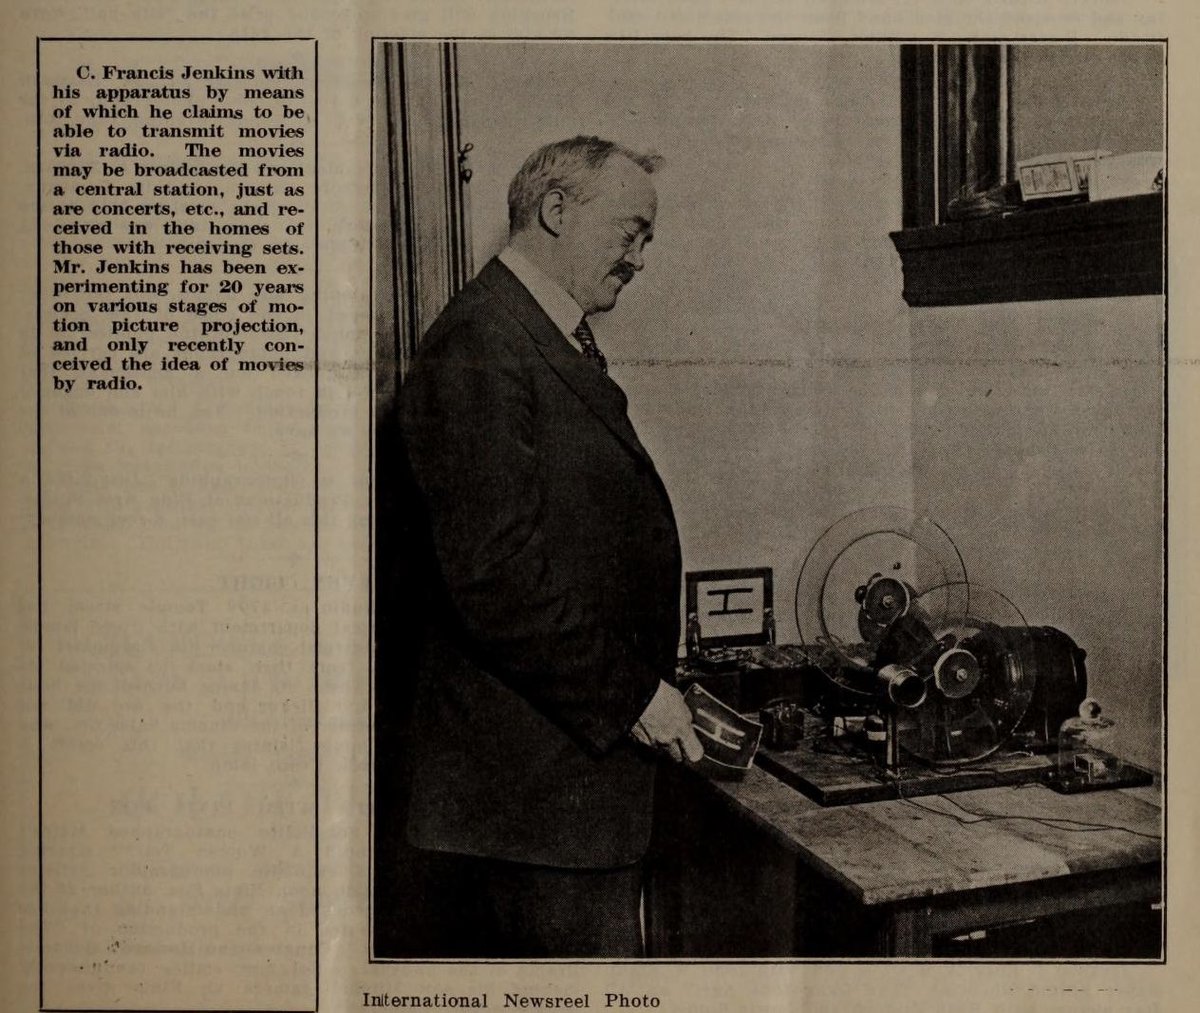 C. Francis Jenkins in 1922 admiring his apparatus set-up for transmitting movies by radio, i.e. the guy’s smiling while trying to invent @netflix